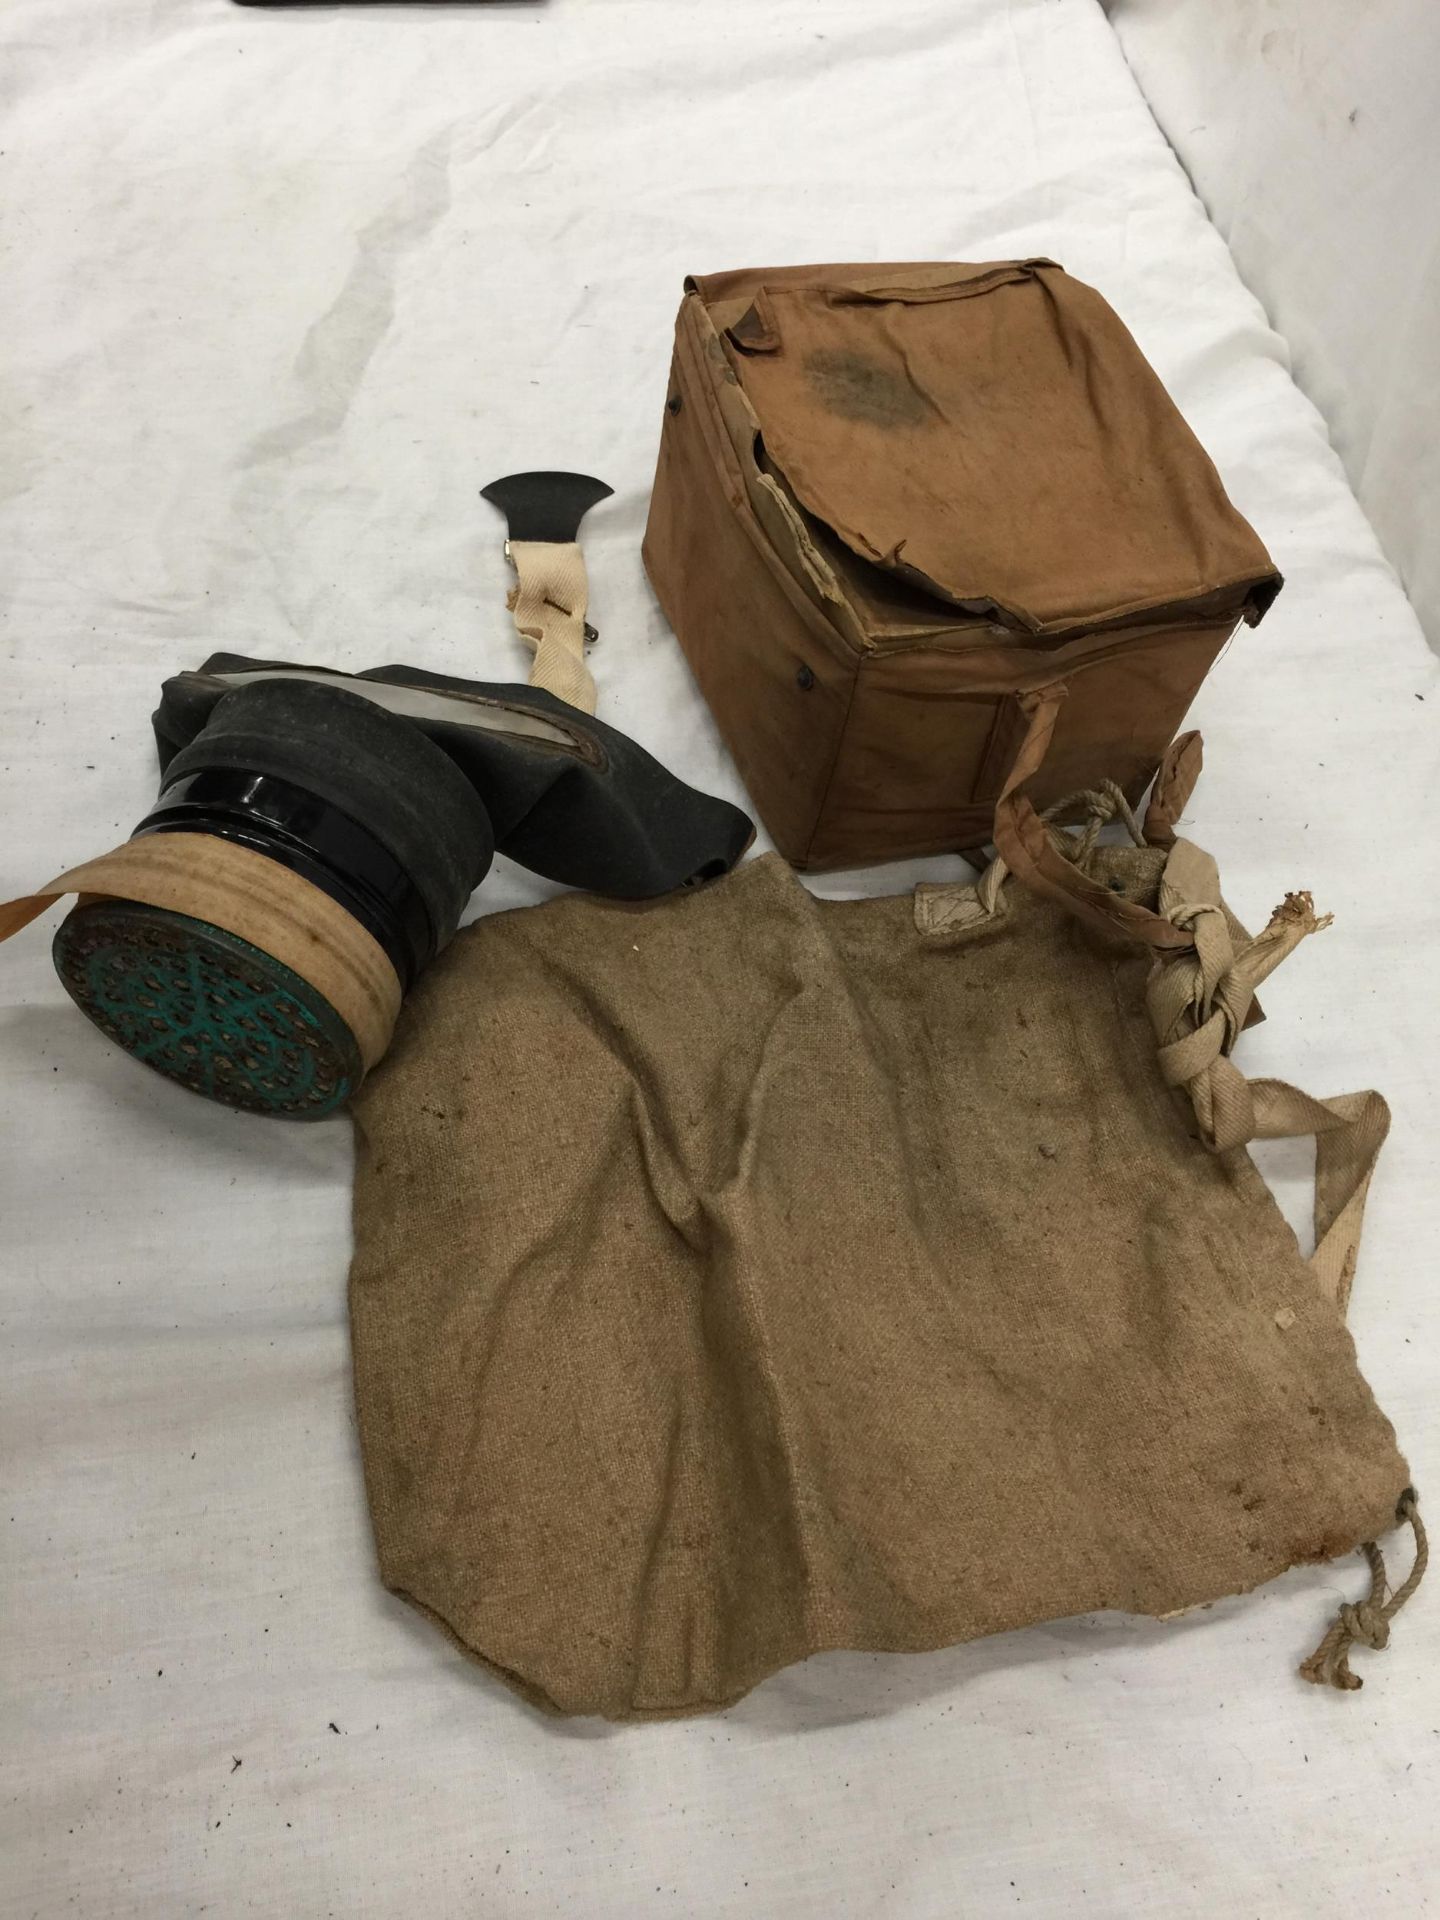 A BRITISH 1941 GAS MASK IN ORIGINAL BOX OF ISSUE IN CANVAS CASE, CANVAS BAG WITH ANTI DIMMING MK - Image 5 of 5